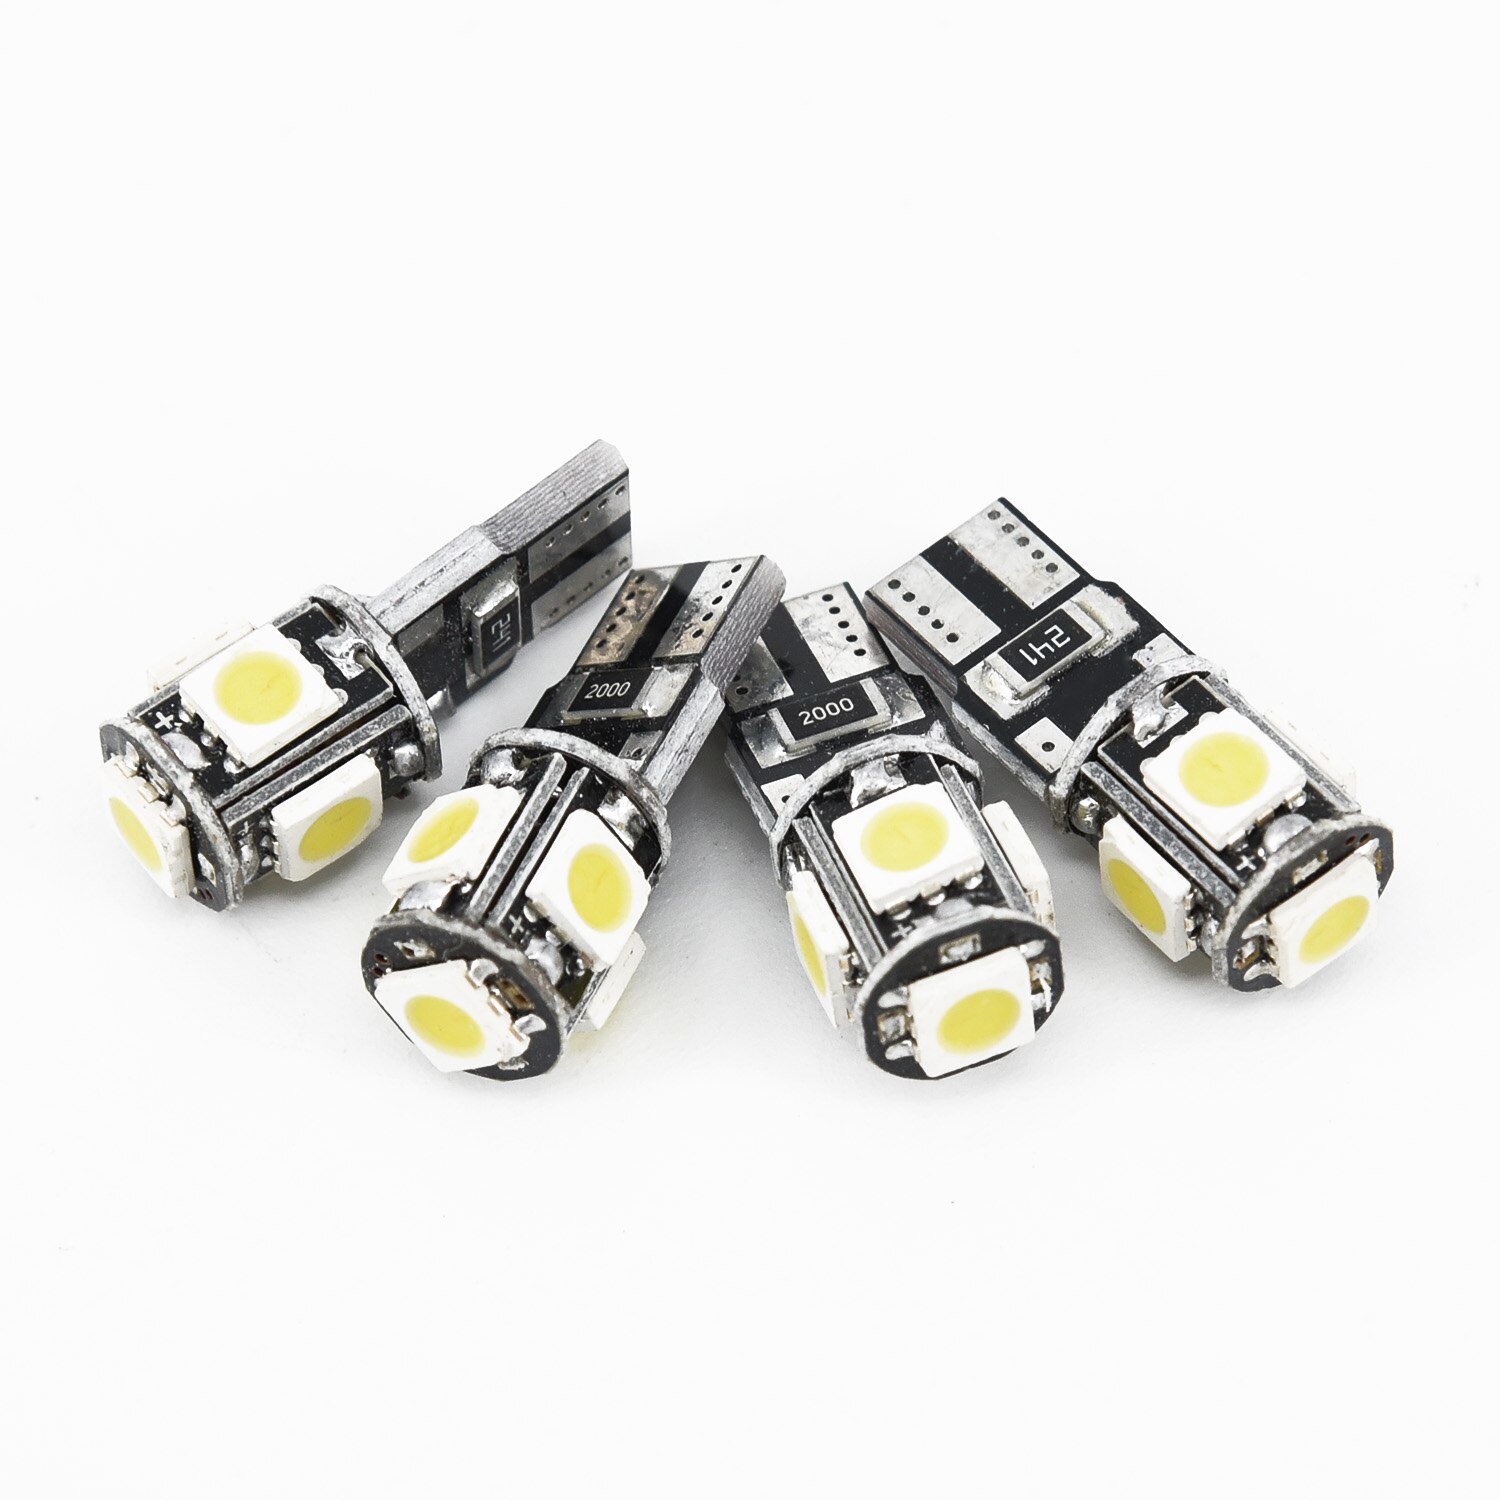 Lamp Licht Side Led Lamp Voertuig Heldere Voor A4 S4 RS4 B8 Wit Interieur 16X Kit Smd 60-130Lm